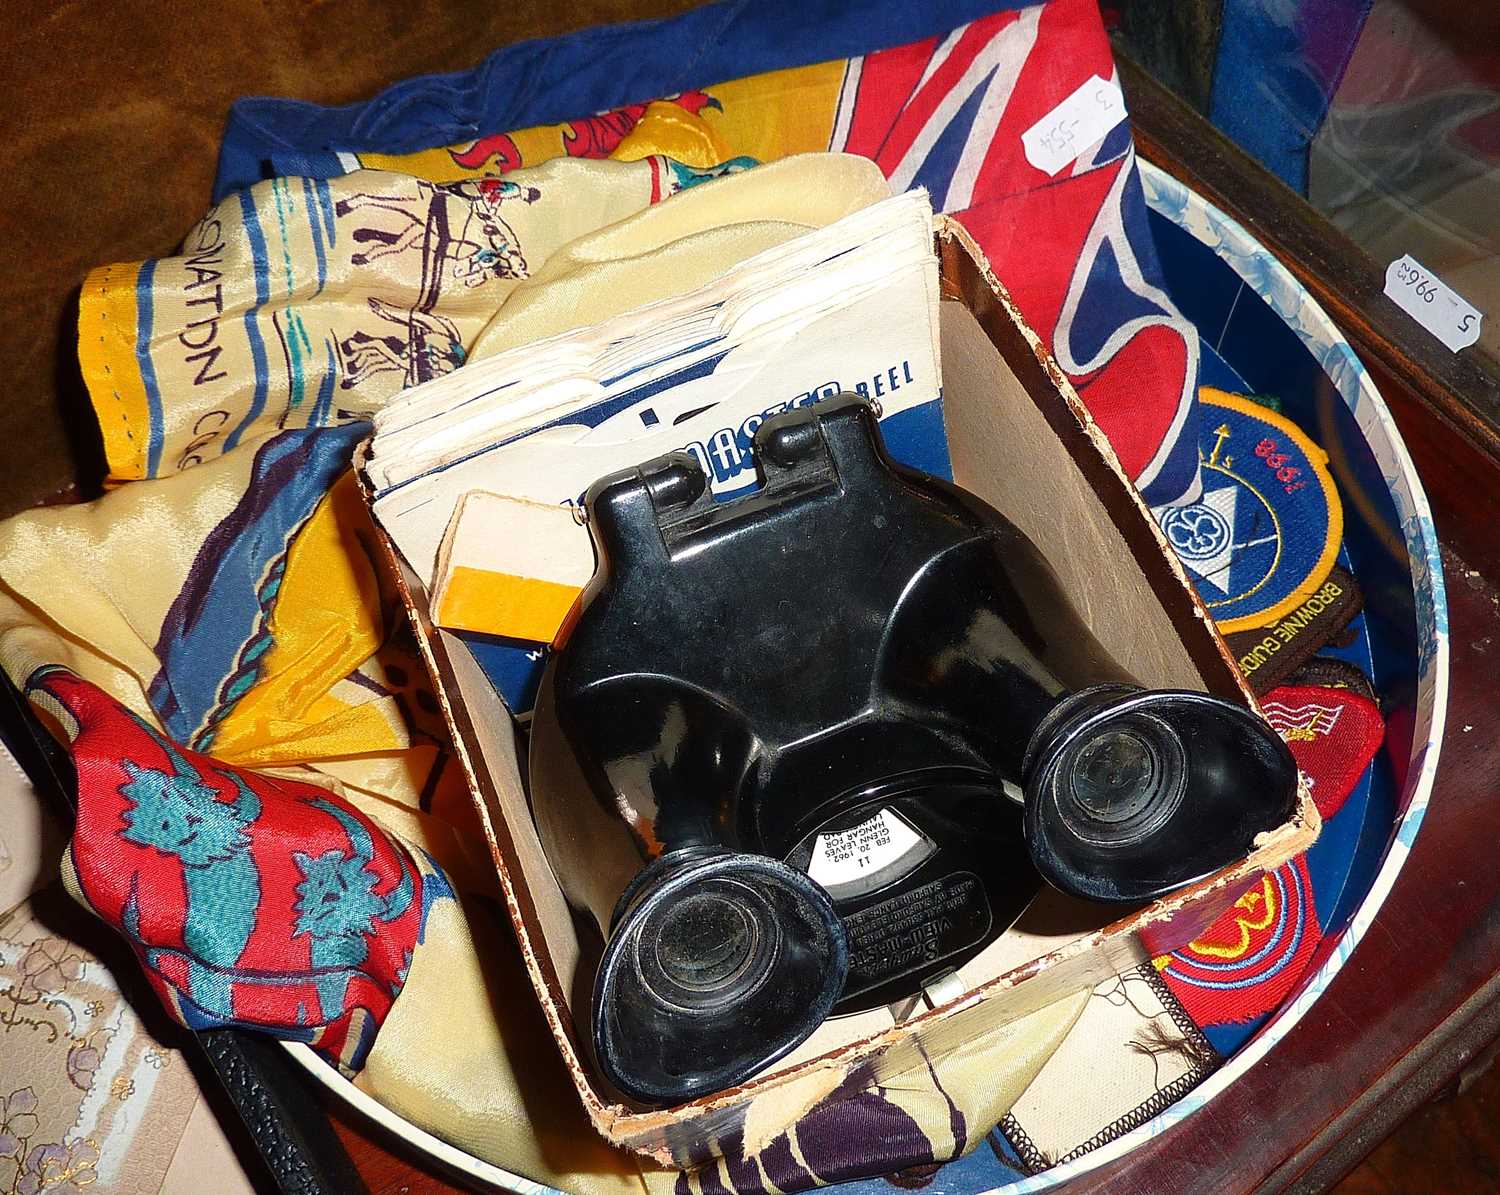 Old Bakelite Viewmaster viewer and reels, 1953 Coronation Silk Scarf, Brownie and Girl Guide cloth